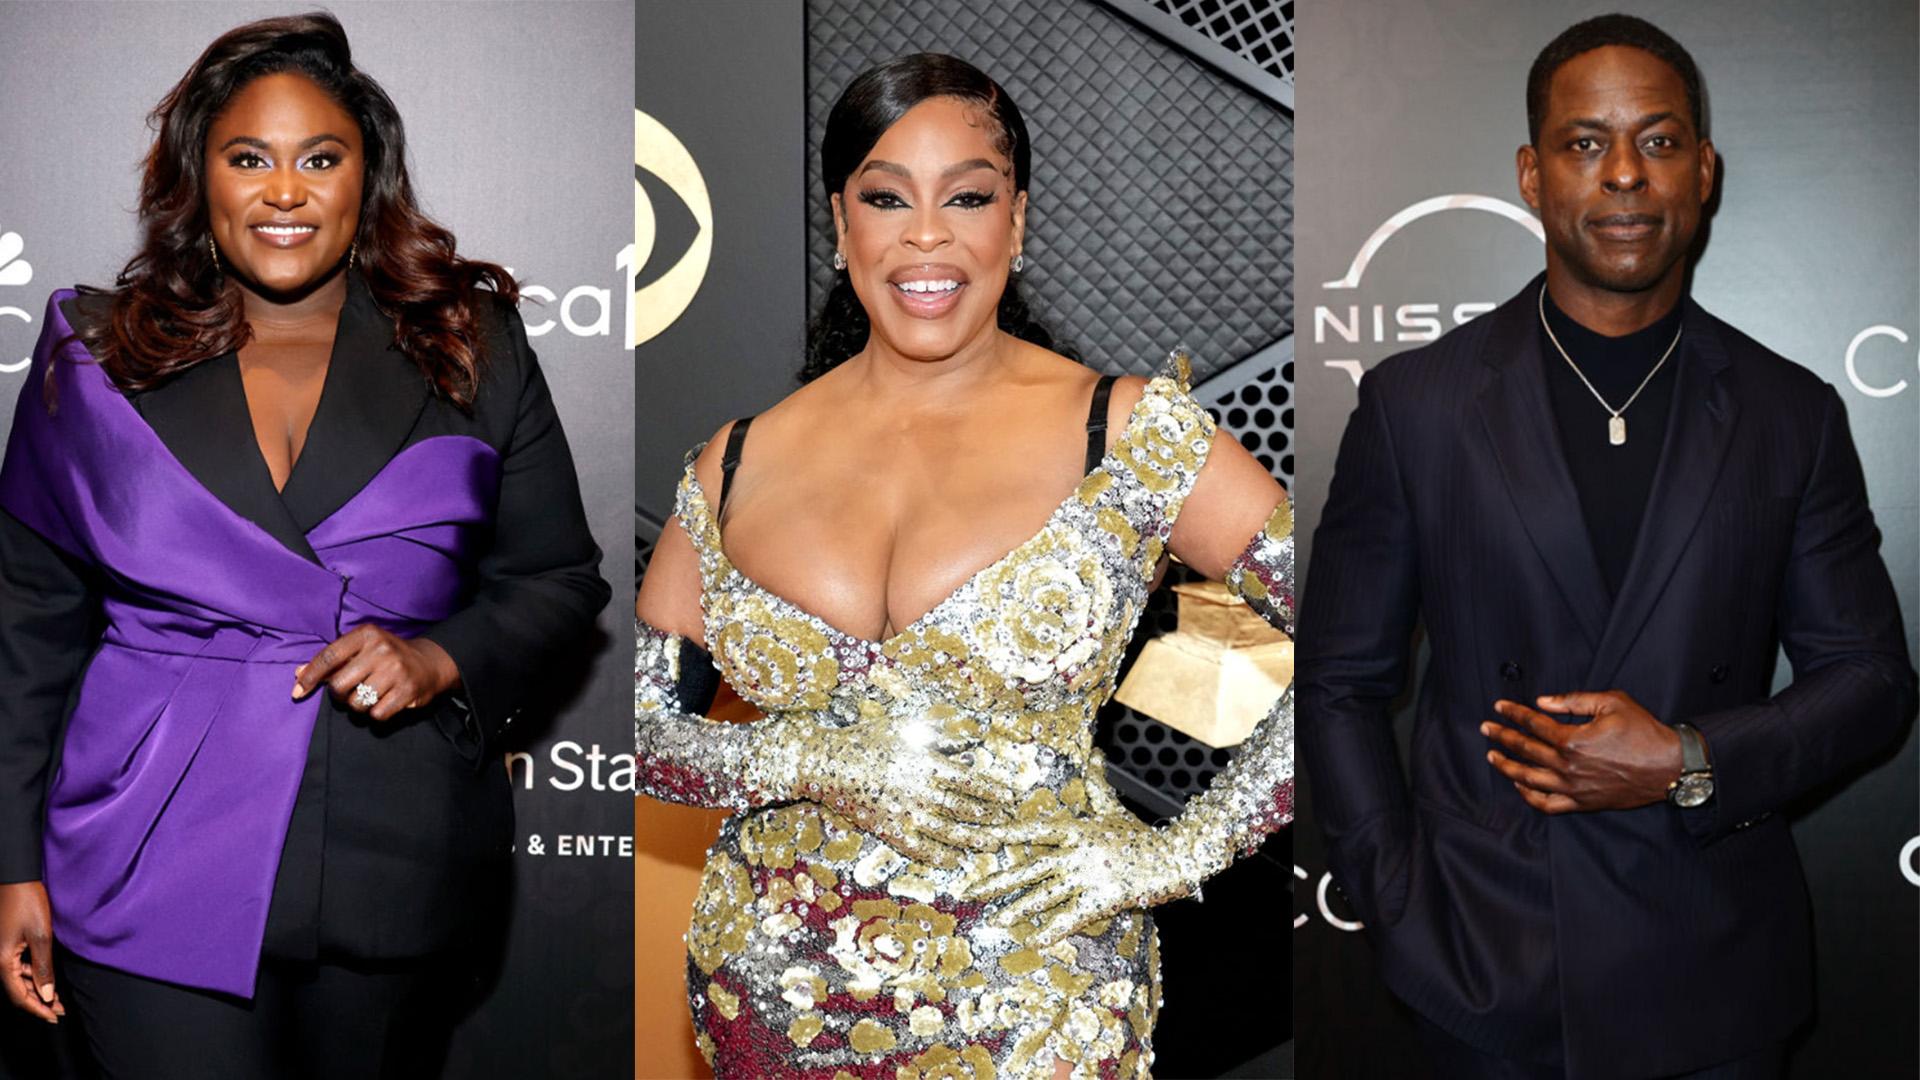 'Real Cousins' Niecy Nash-Betts, Danielle Brooks, And Sterling K. Brown Make Waves In Hollywood With An Estimated Combined Net Worth Of $16M